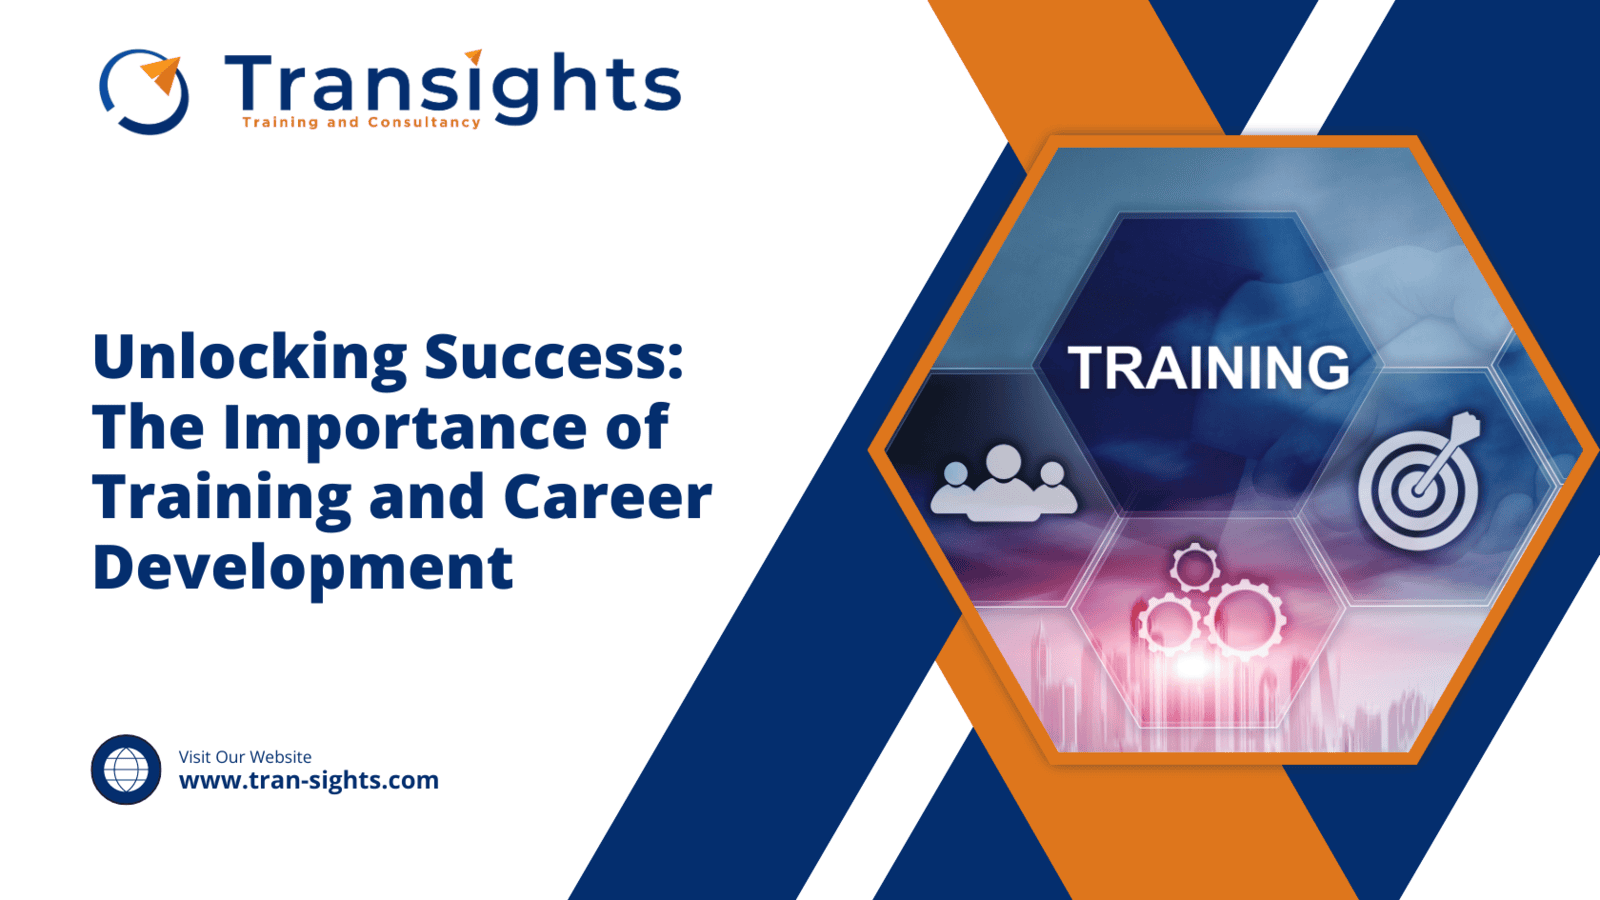 Unlocking Success: The Importance of Training and Career Development